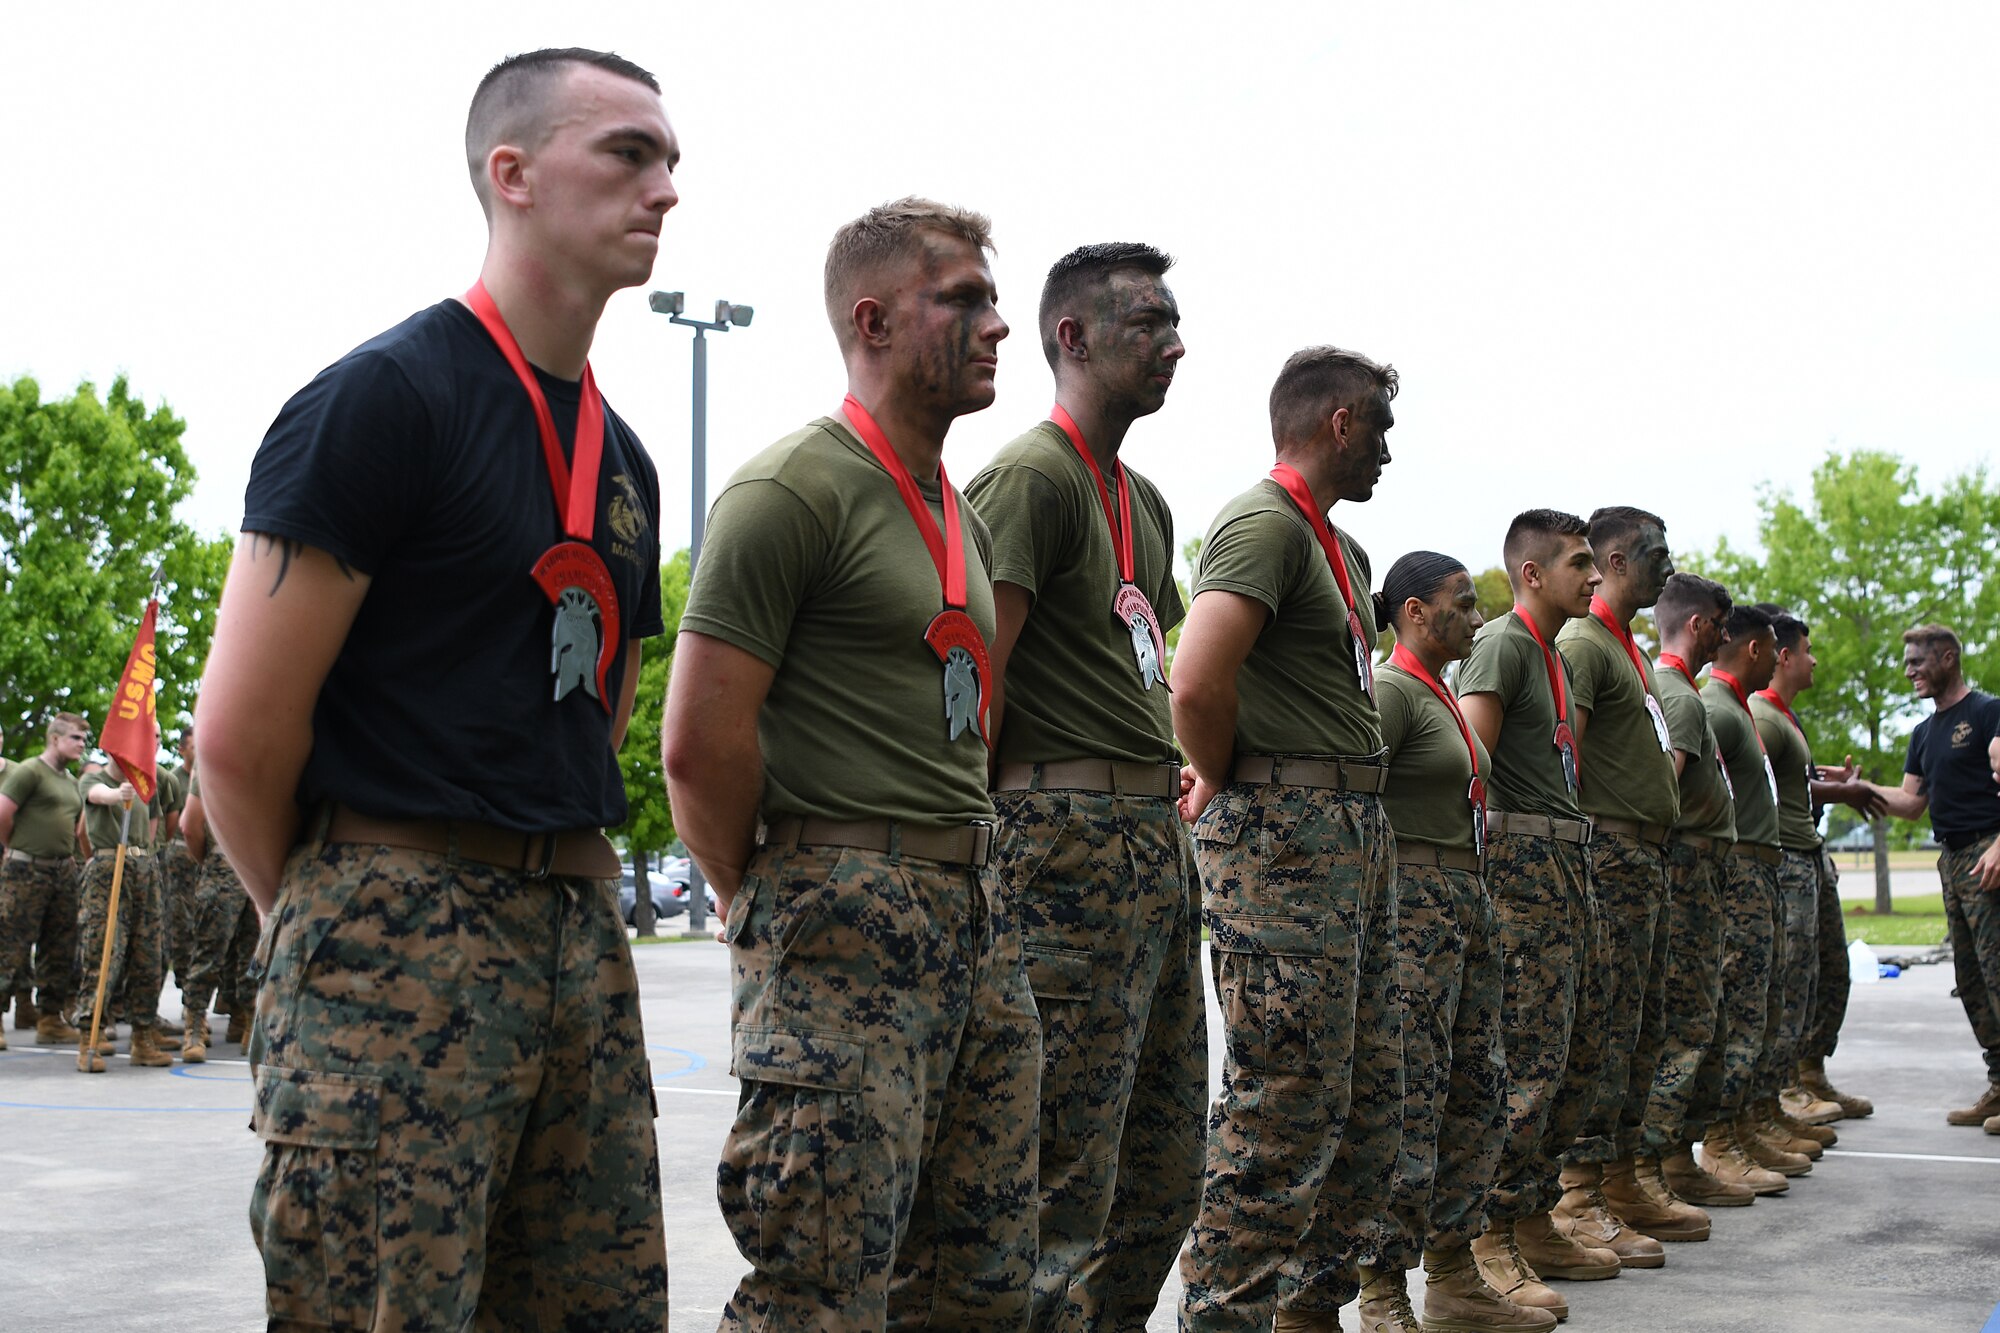 Keesler Marine Detachment students receive their first place warrior medallions during the 2nd Annual Warrior Day at the Keesler Marine Detachment at Keesler Air Force Base, Mississippi, April 6, 2018. Ten teams competed against each other in eight events that served to promote unit cohesion, camaraderie and small unit leadership. The winning team received a Warrior Medallion as well as a coin. (U.S. Air Force photo by Airman 1st Class Suzie Plotnikov)